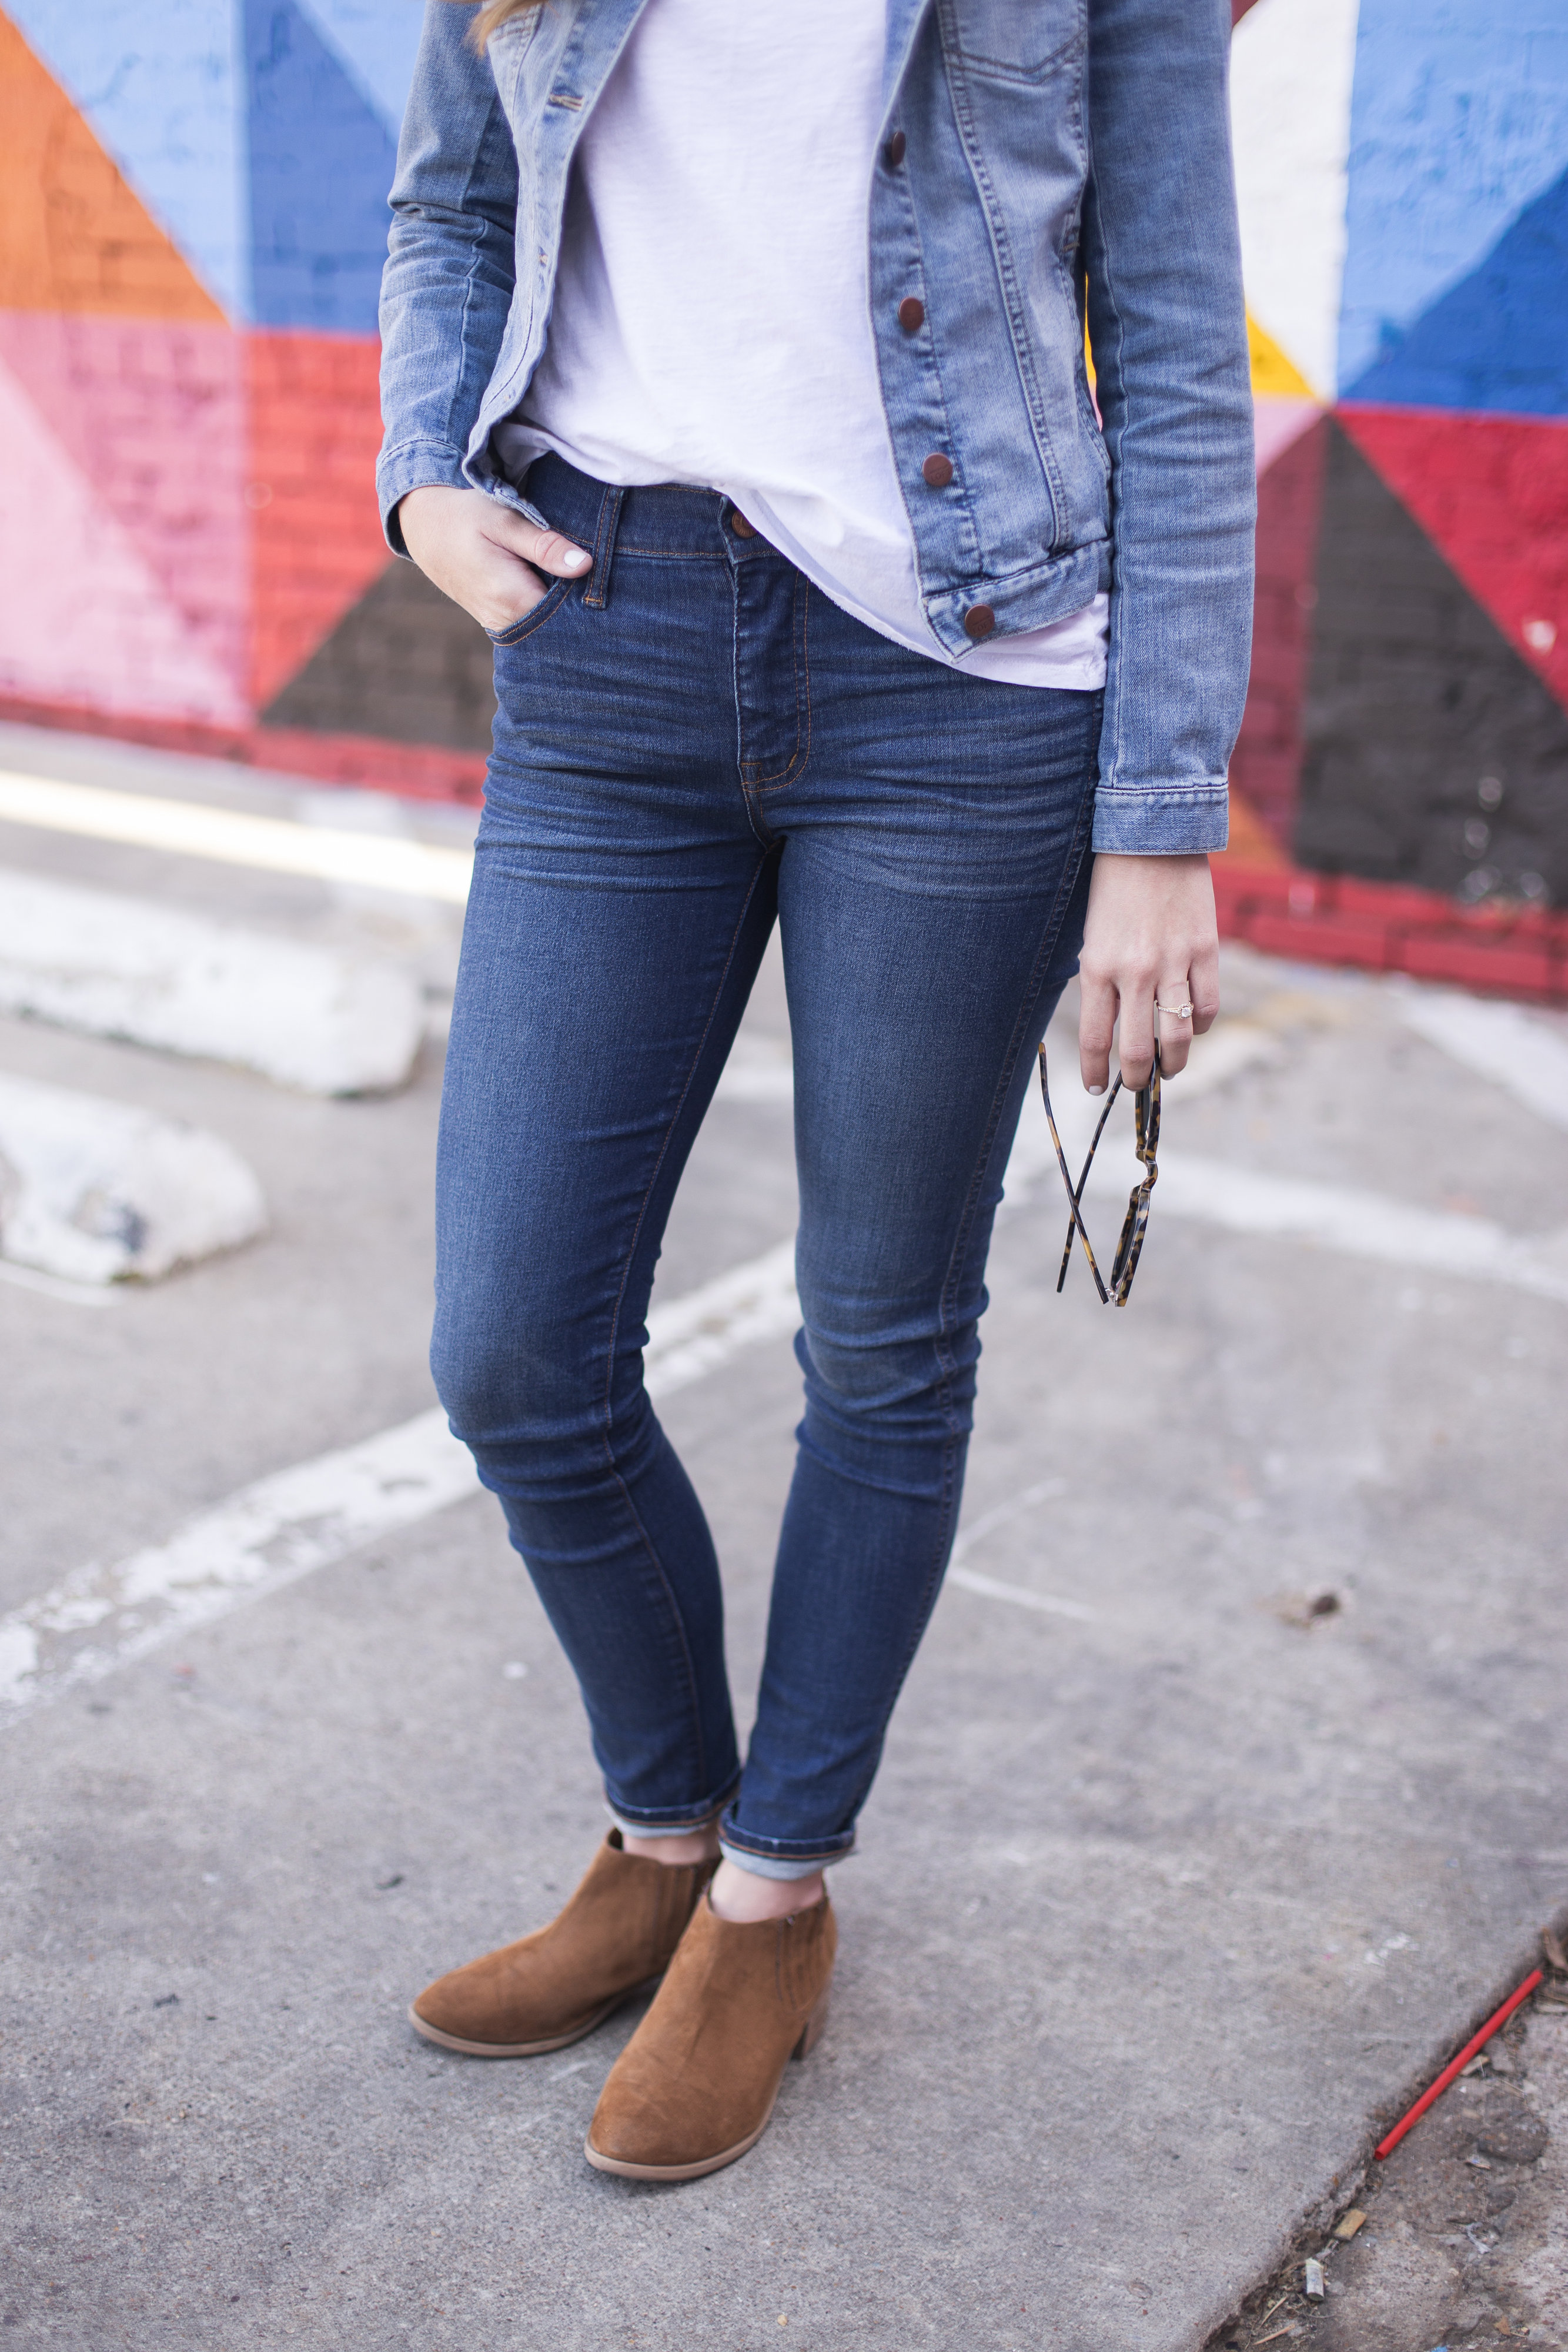 madewell jeans discount